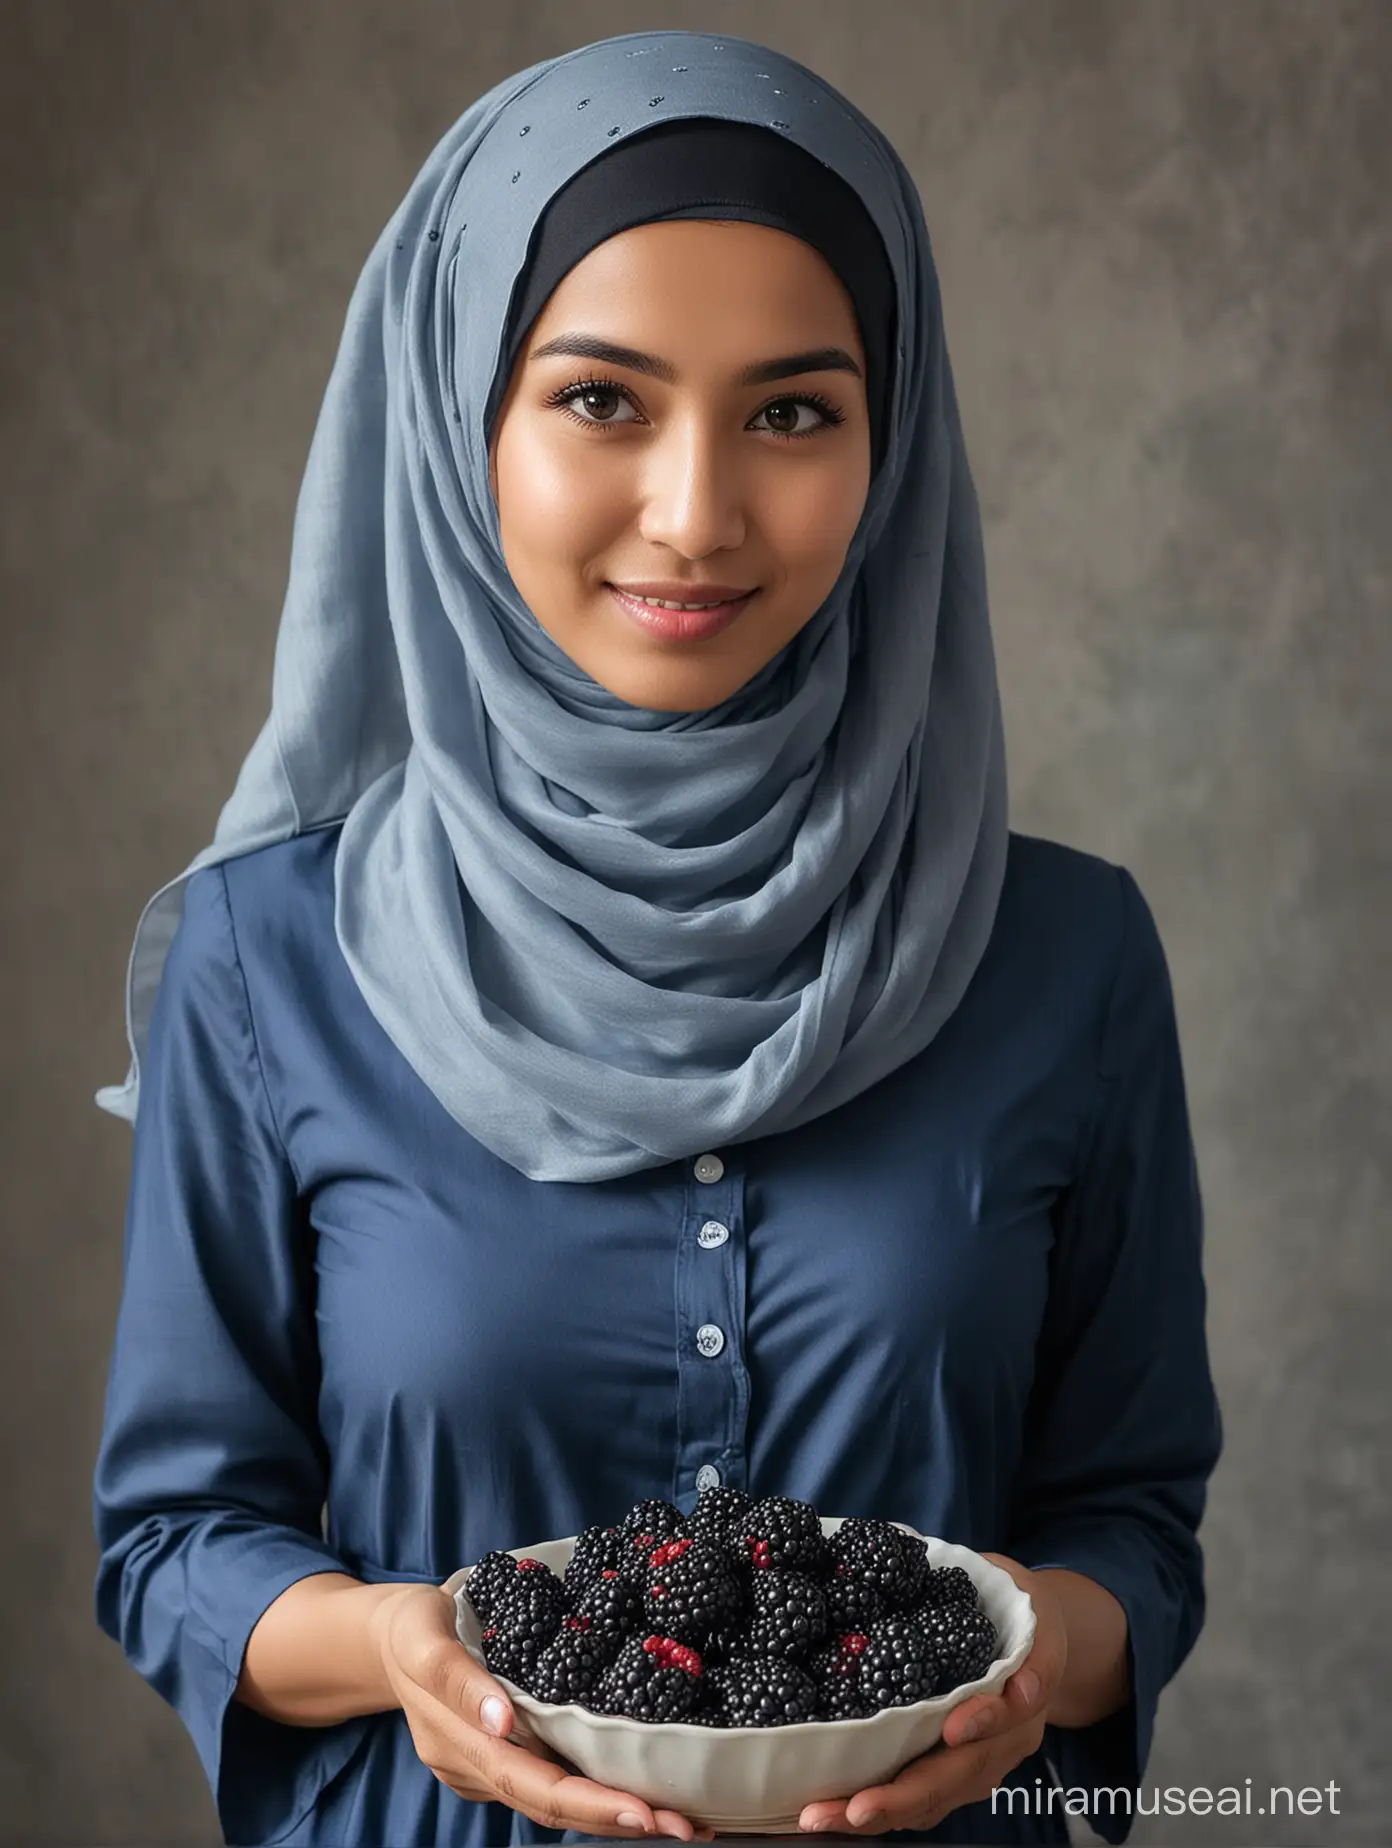 Indonesian Woman in Blue Dress and Hijab Holding Bowl of Blackberries